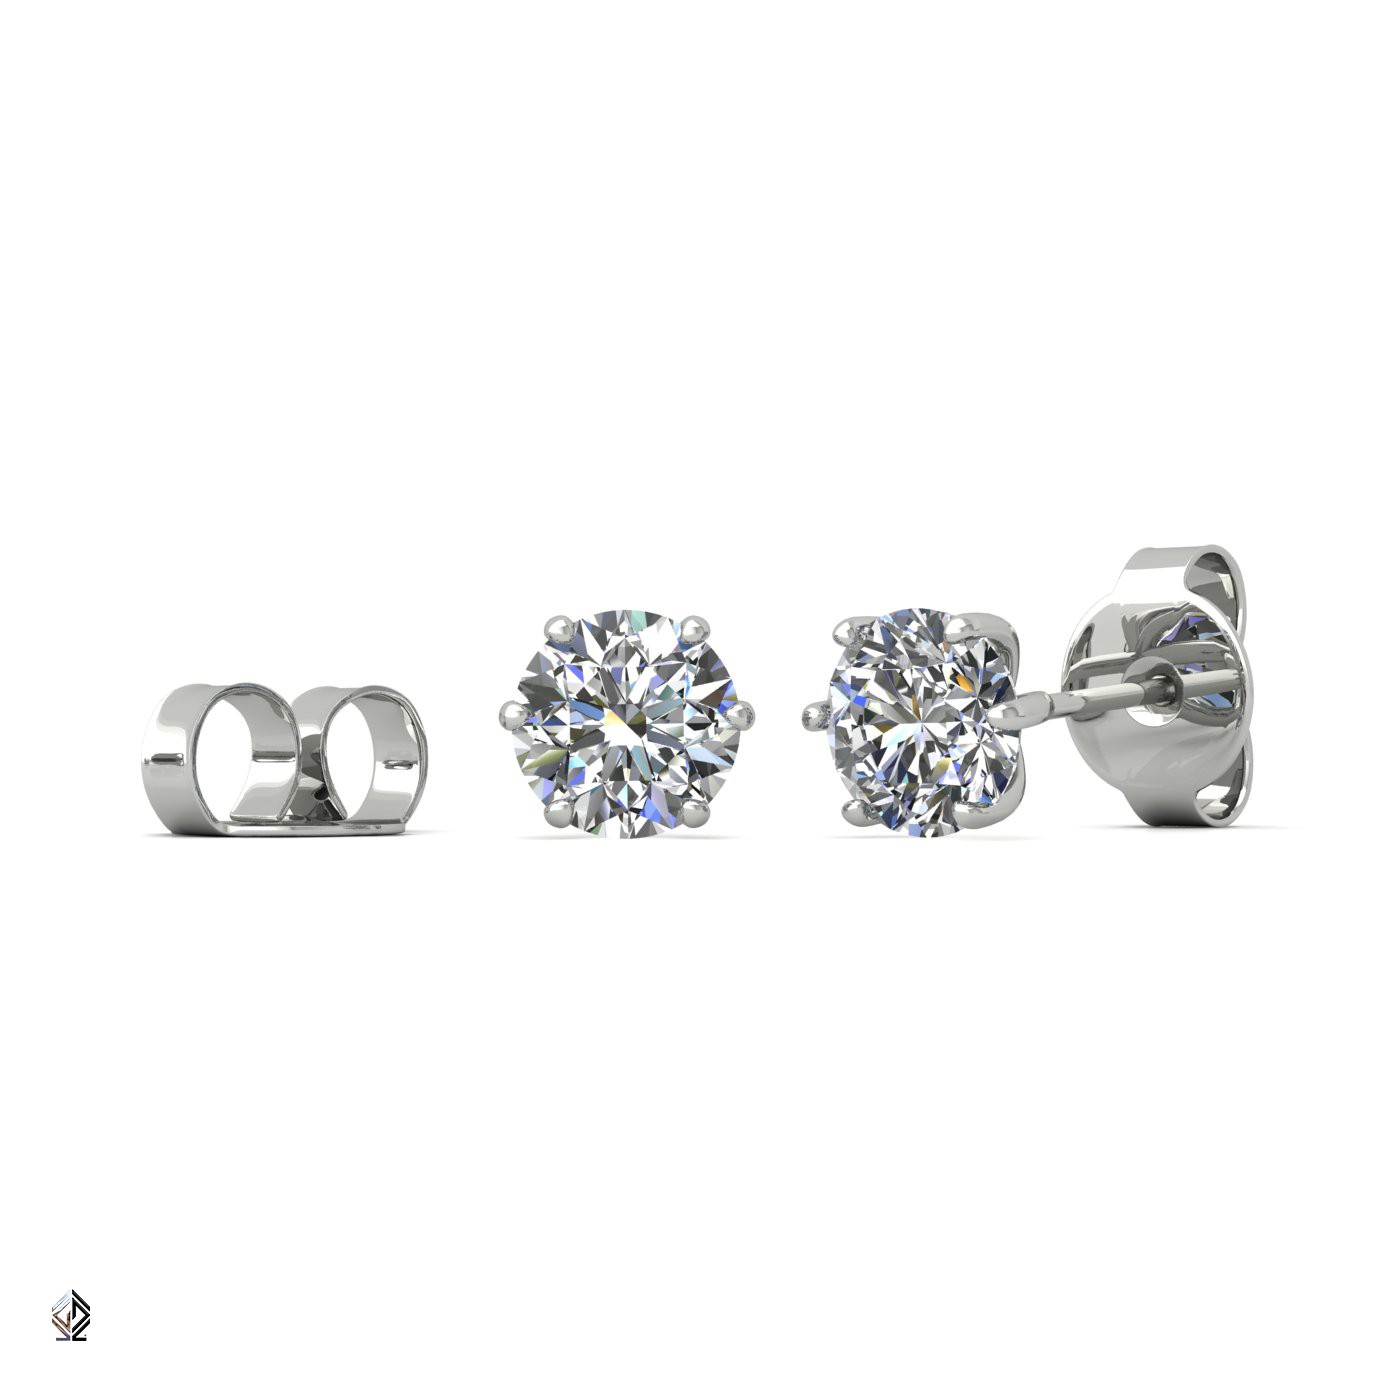 18k white gold 1.2 ct each (2,4 tcw) 6 prongs round shape diamond earrings Photos & images